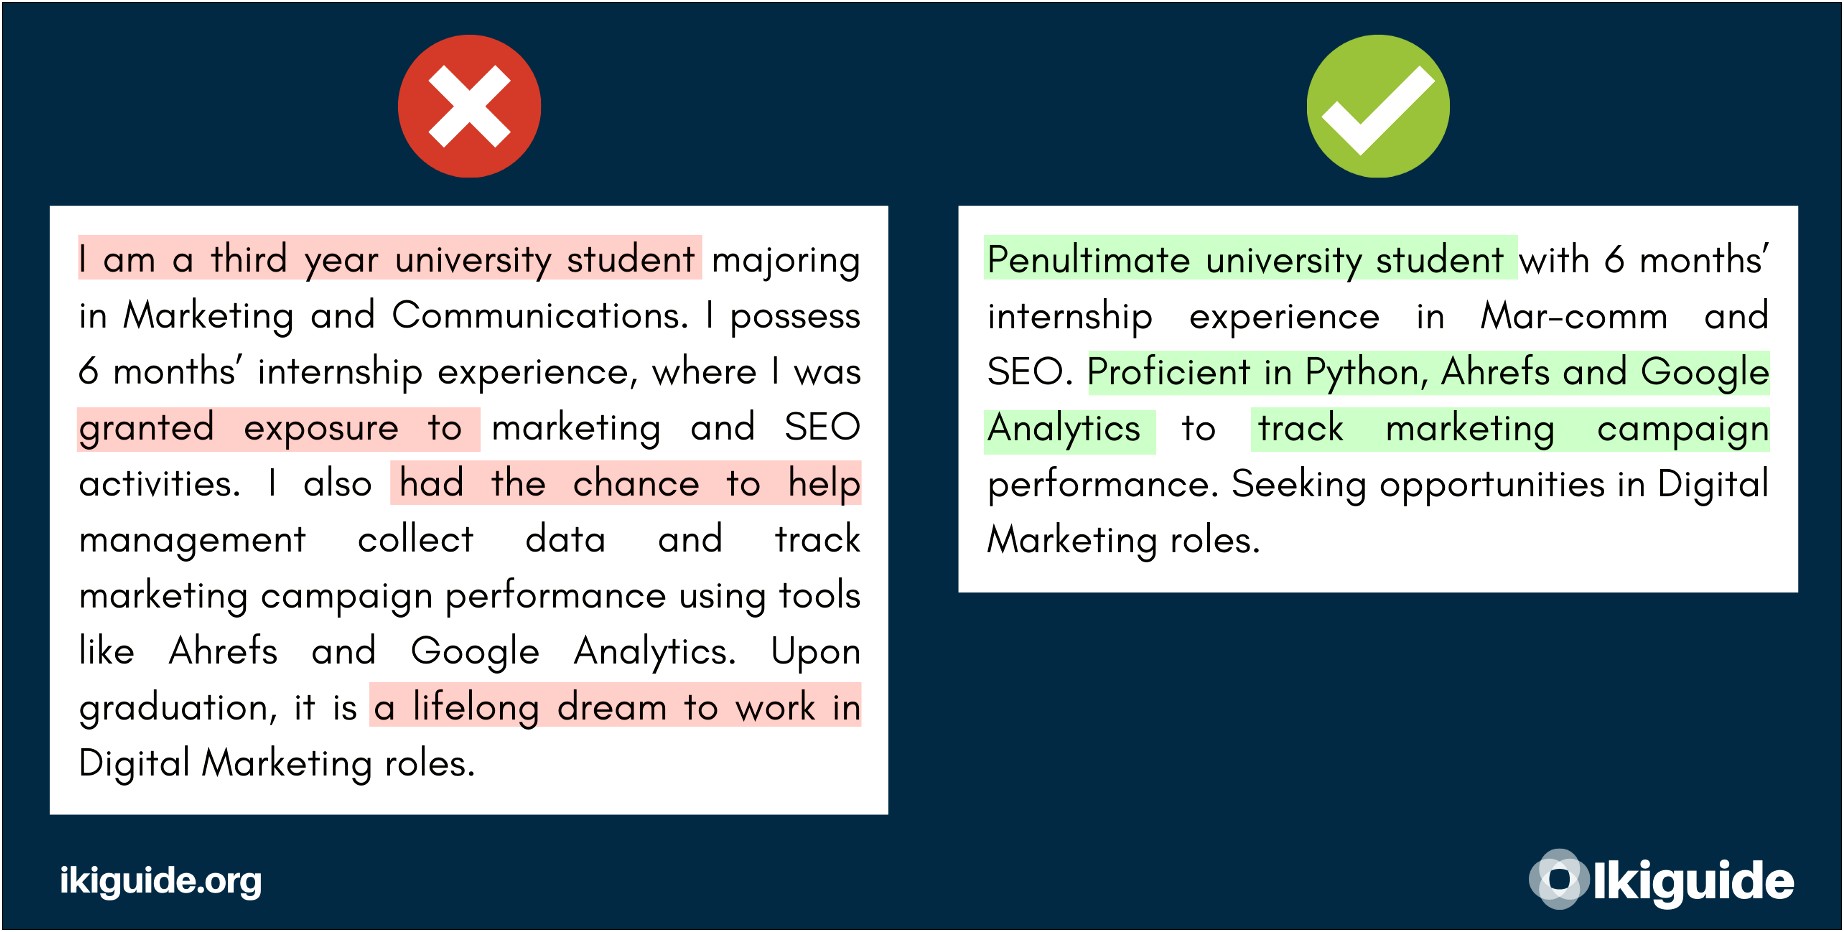 Examples Of Objectives To Put On A Resume